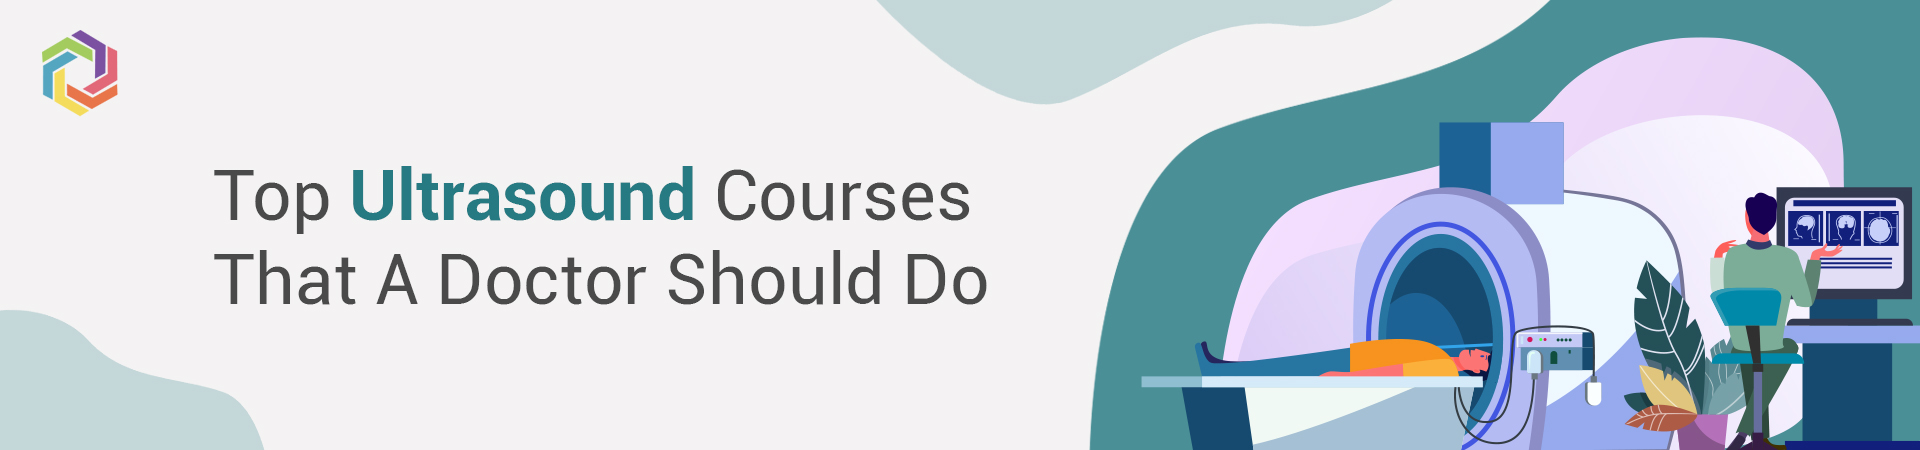 Top Ultrasound Courses that a Doctor should do